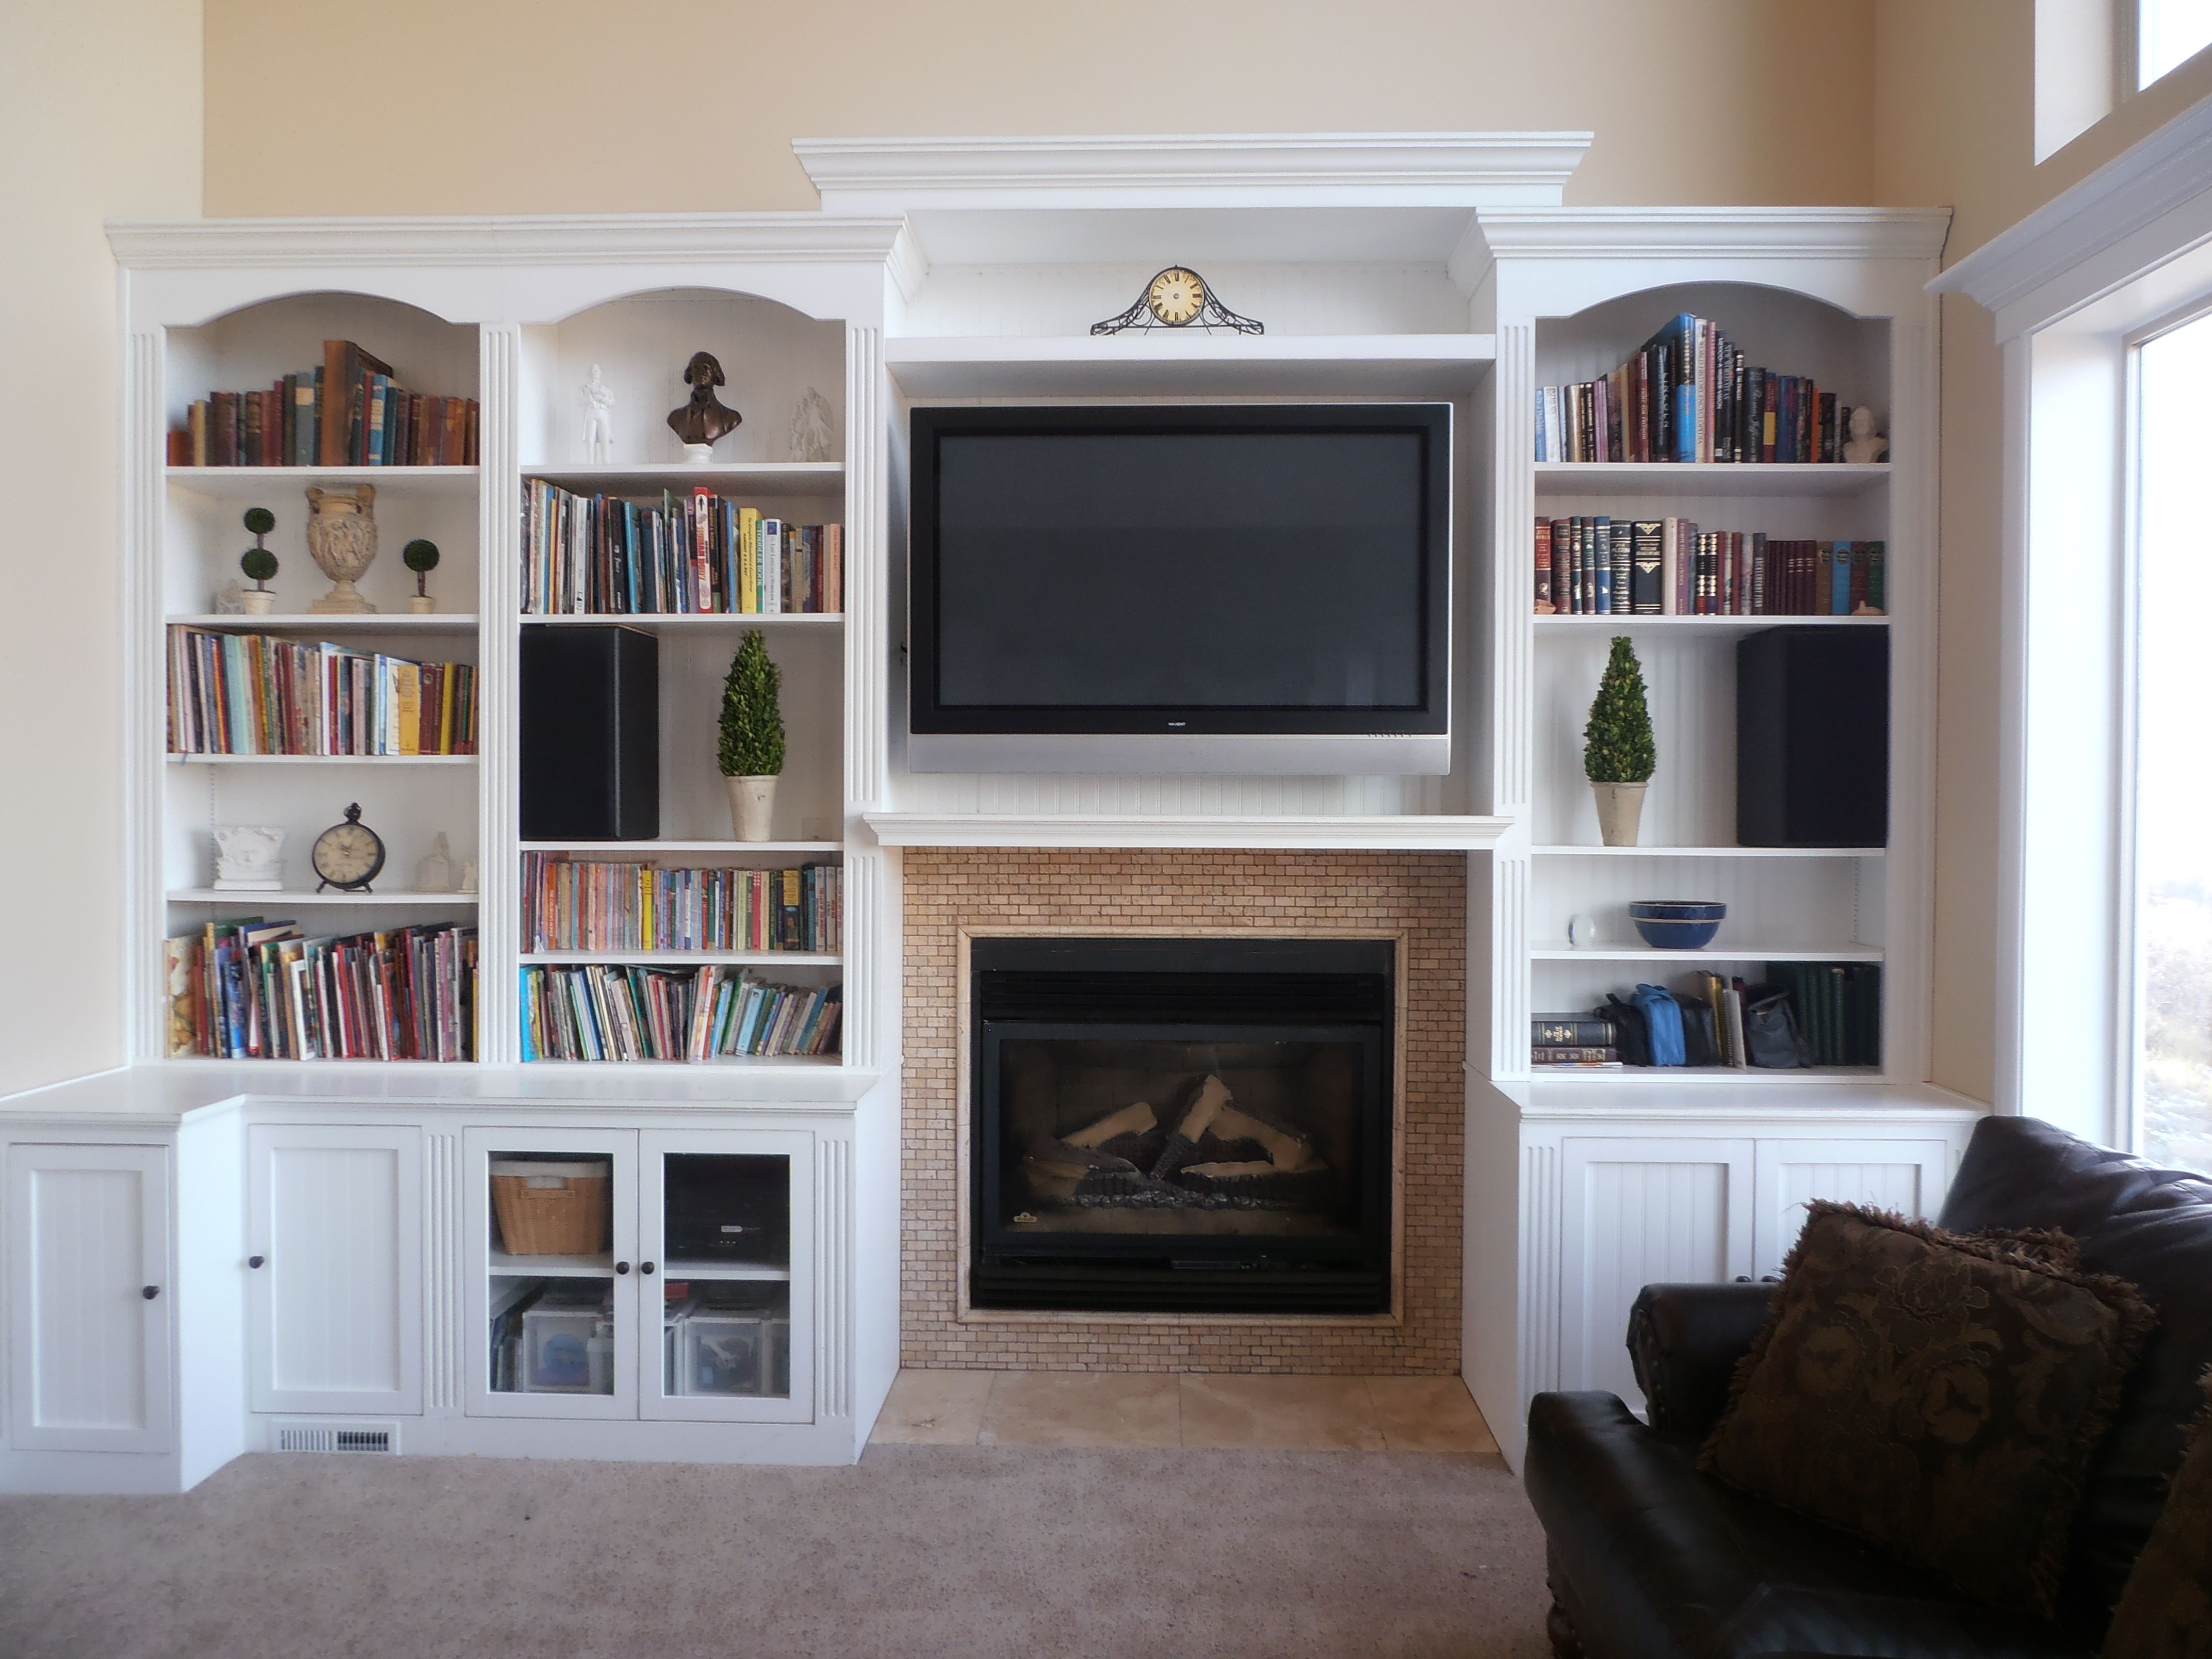 Fireplace With Hearth Center Bookcases On Sides Entertainment Intended For Tv Bookshelf Unit (View 11 of 15)